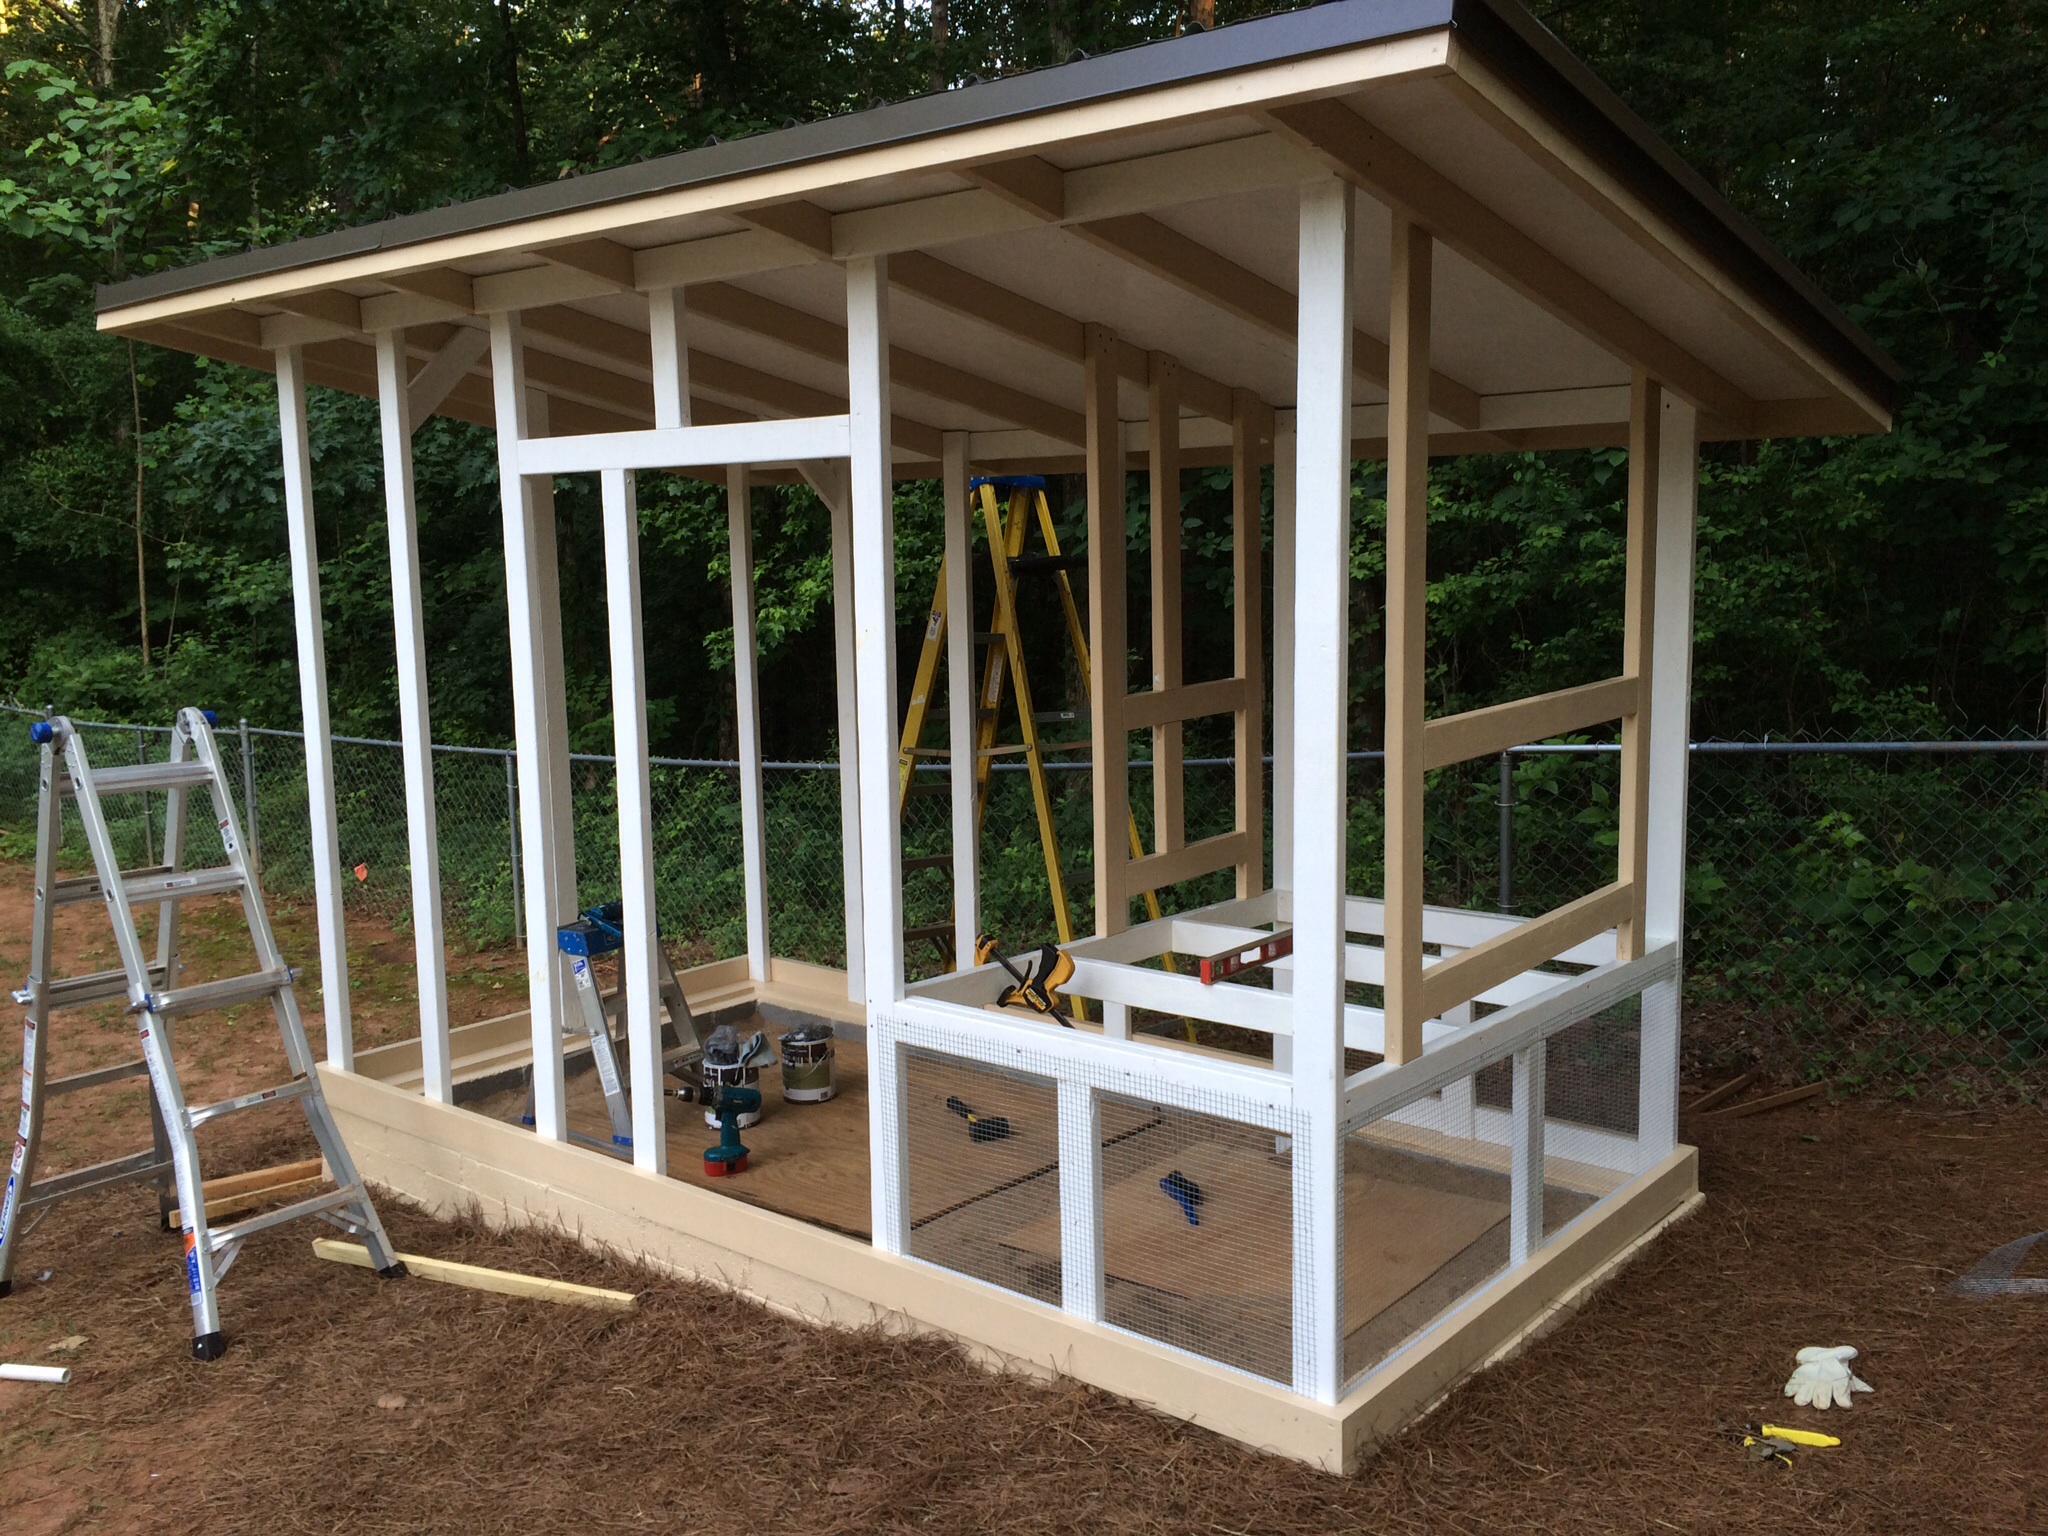 06/16/2014 All framing completed and started installing hardware cloth.